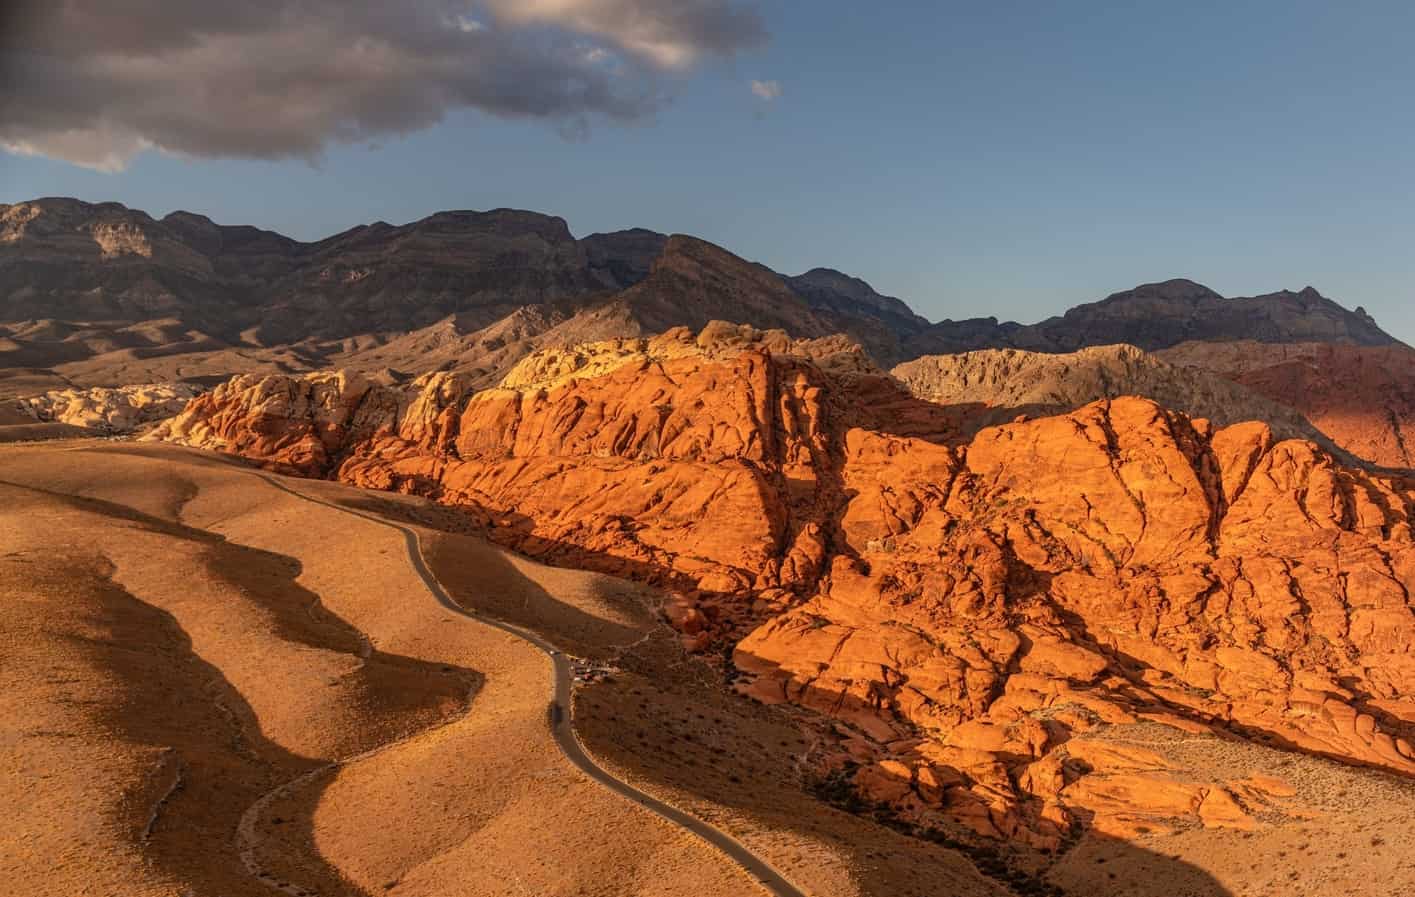 red rock canyon tours from vegas